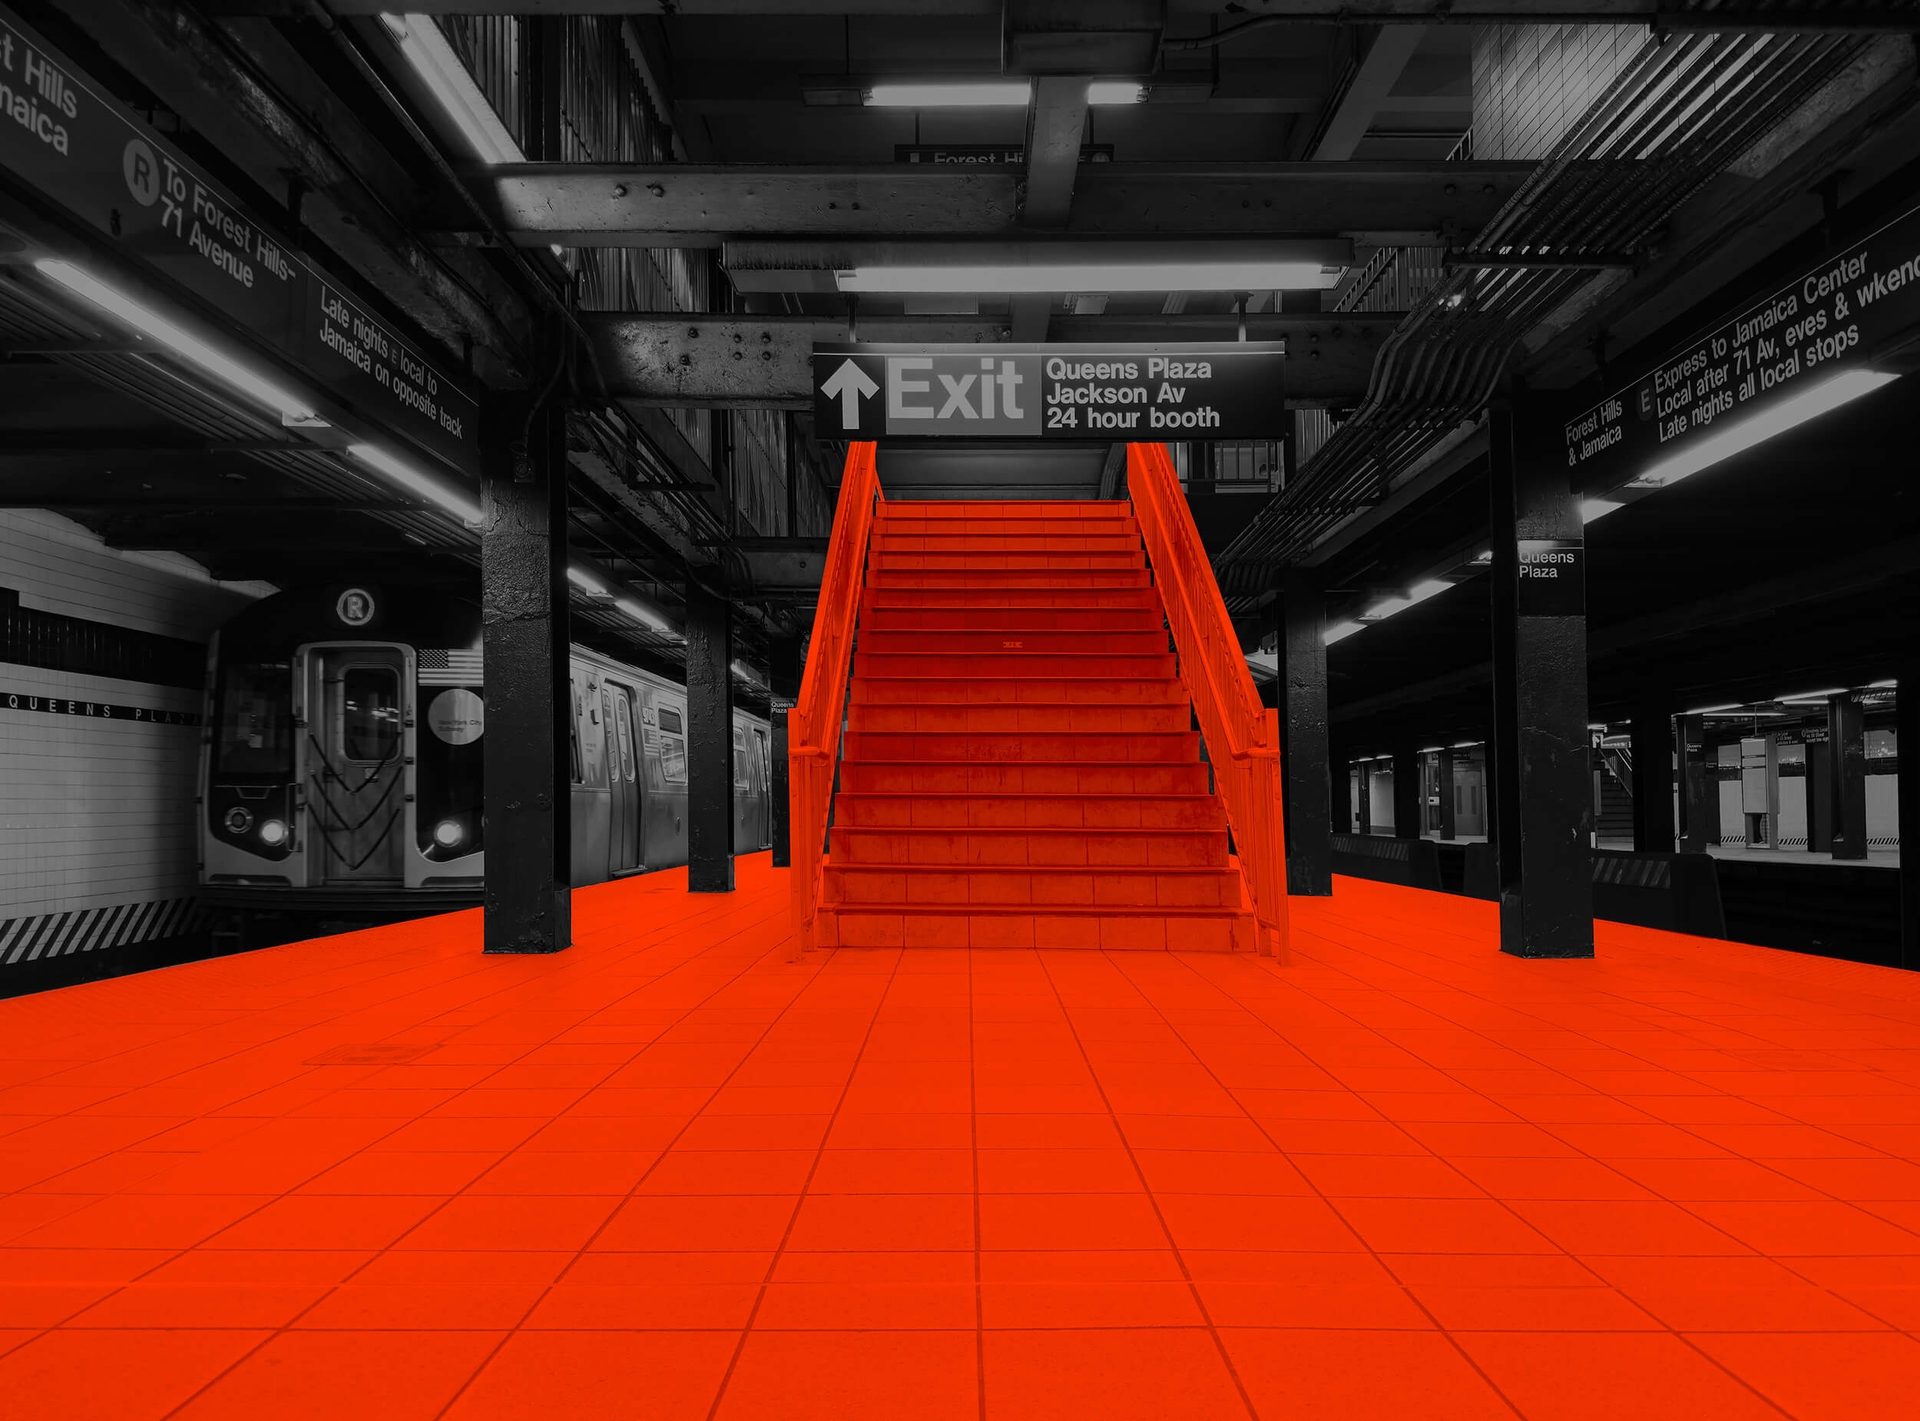 A set of stairs in a New York subway station showing the exit to the street, with no elevator available for those who need it.